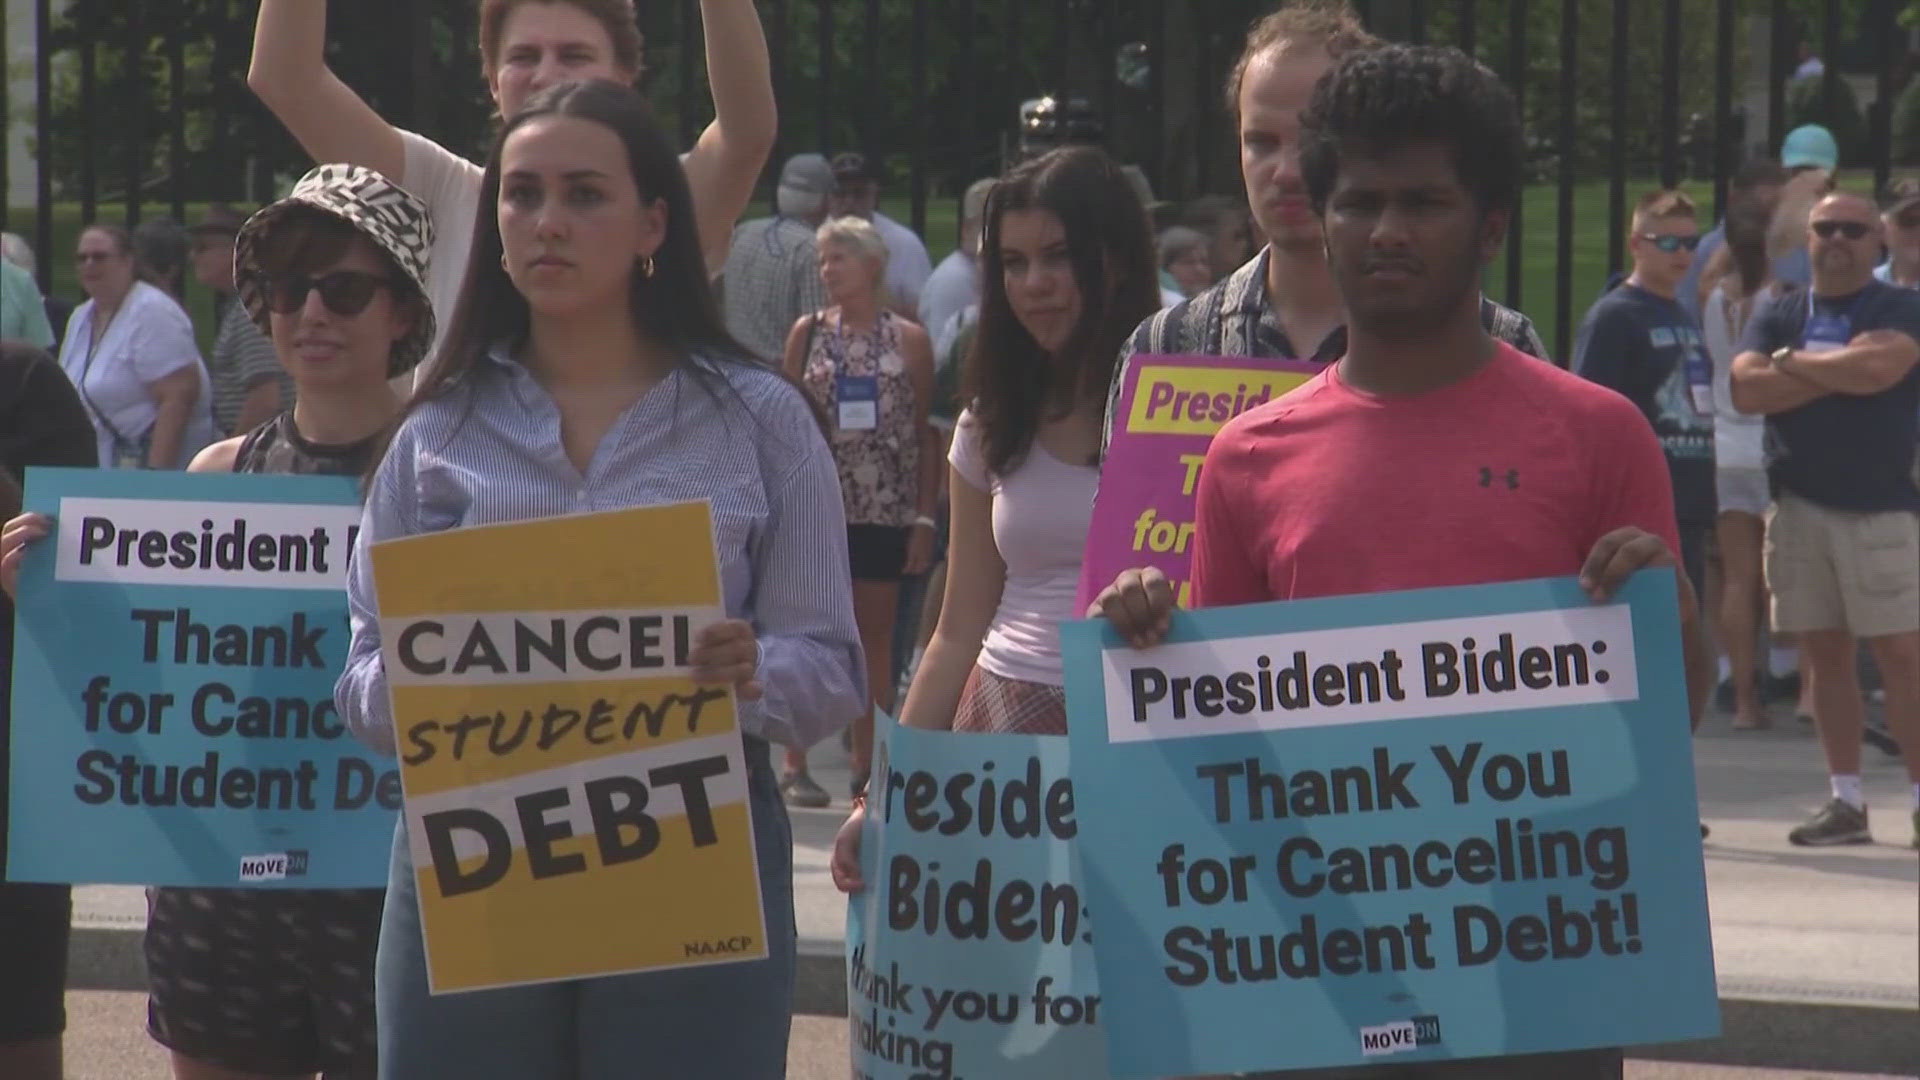 Two federal judges in Missouri and Kansas have blocked parts of a student loan repayment plan.